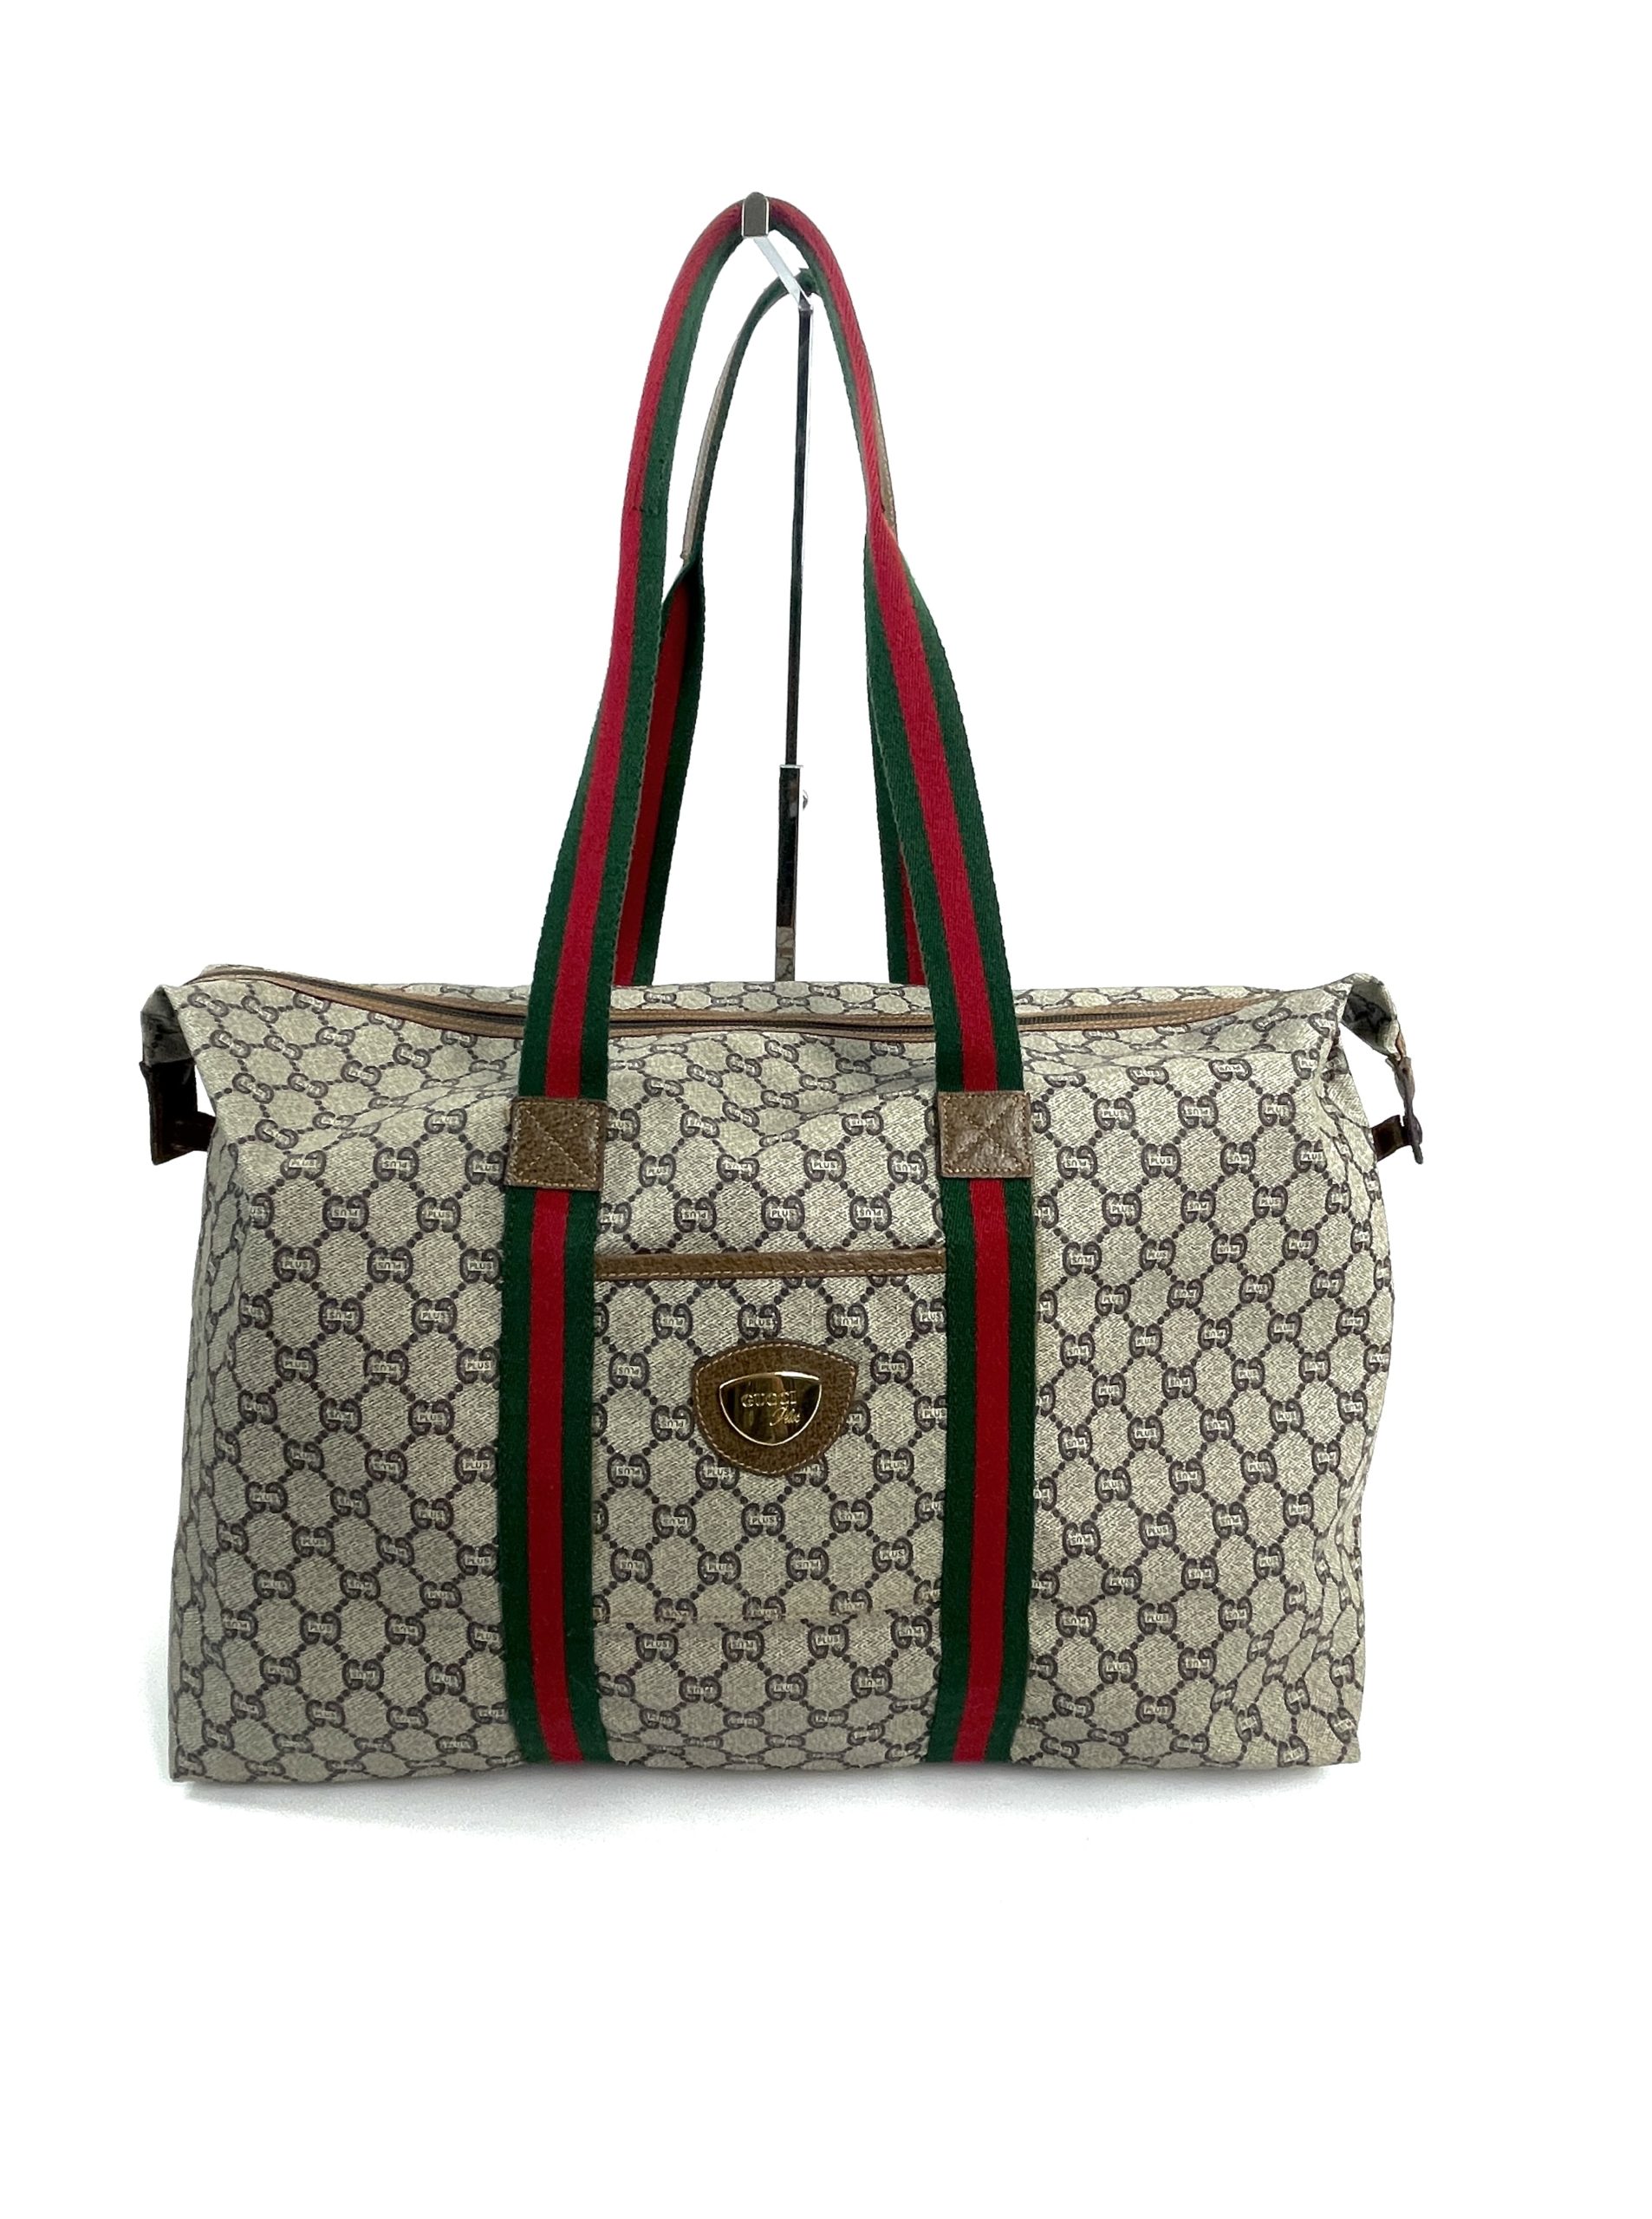 Authenticated Used GUCCI Old Gucci GUCCIPLUS Plus Tote Bag Handbag